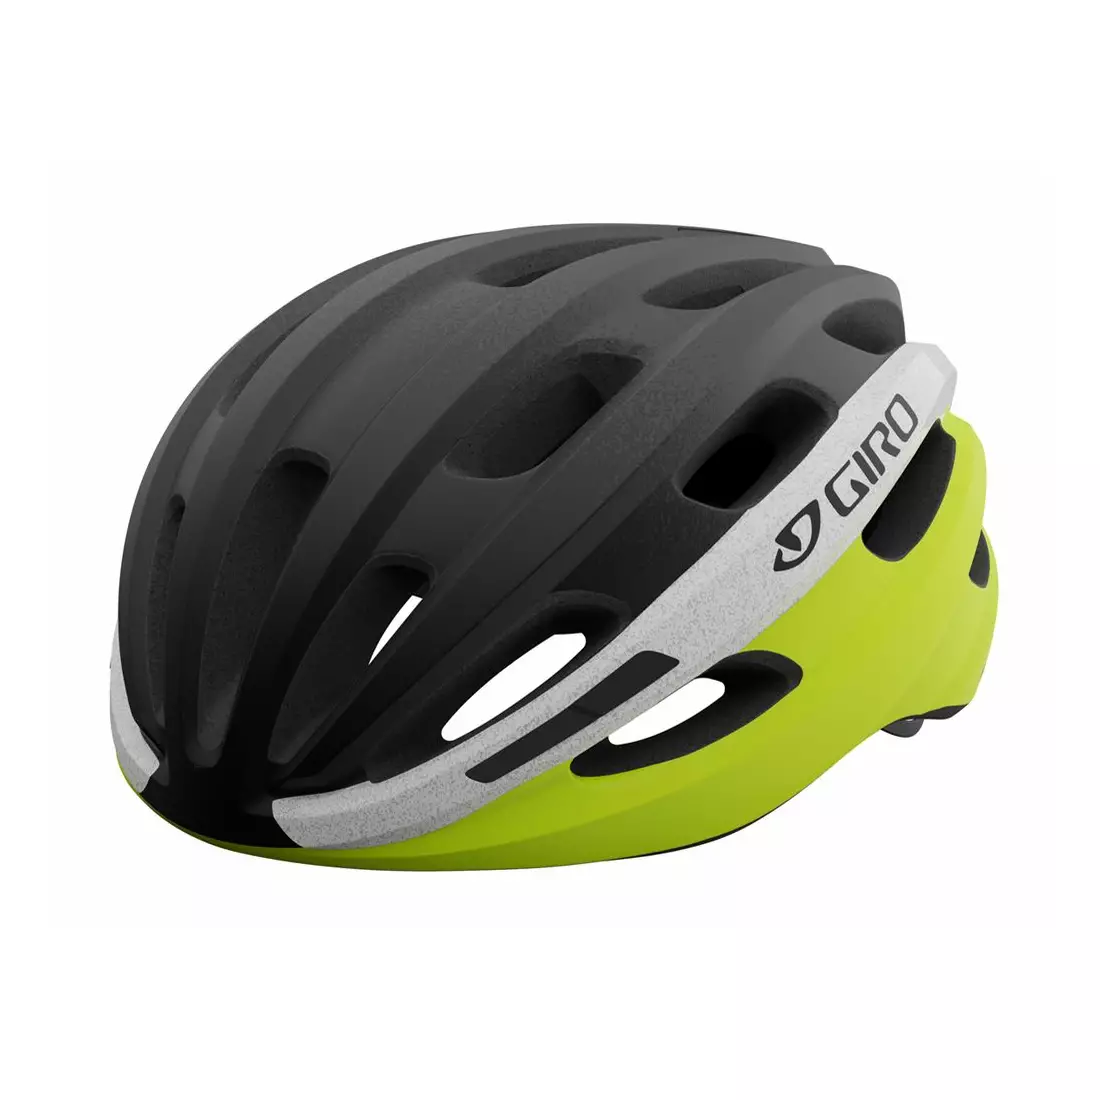 GIRO kask rowerowy szosowy ISODE INTEGRATED MIPS matte black fade highlight yellow GR-7129915